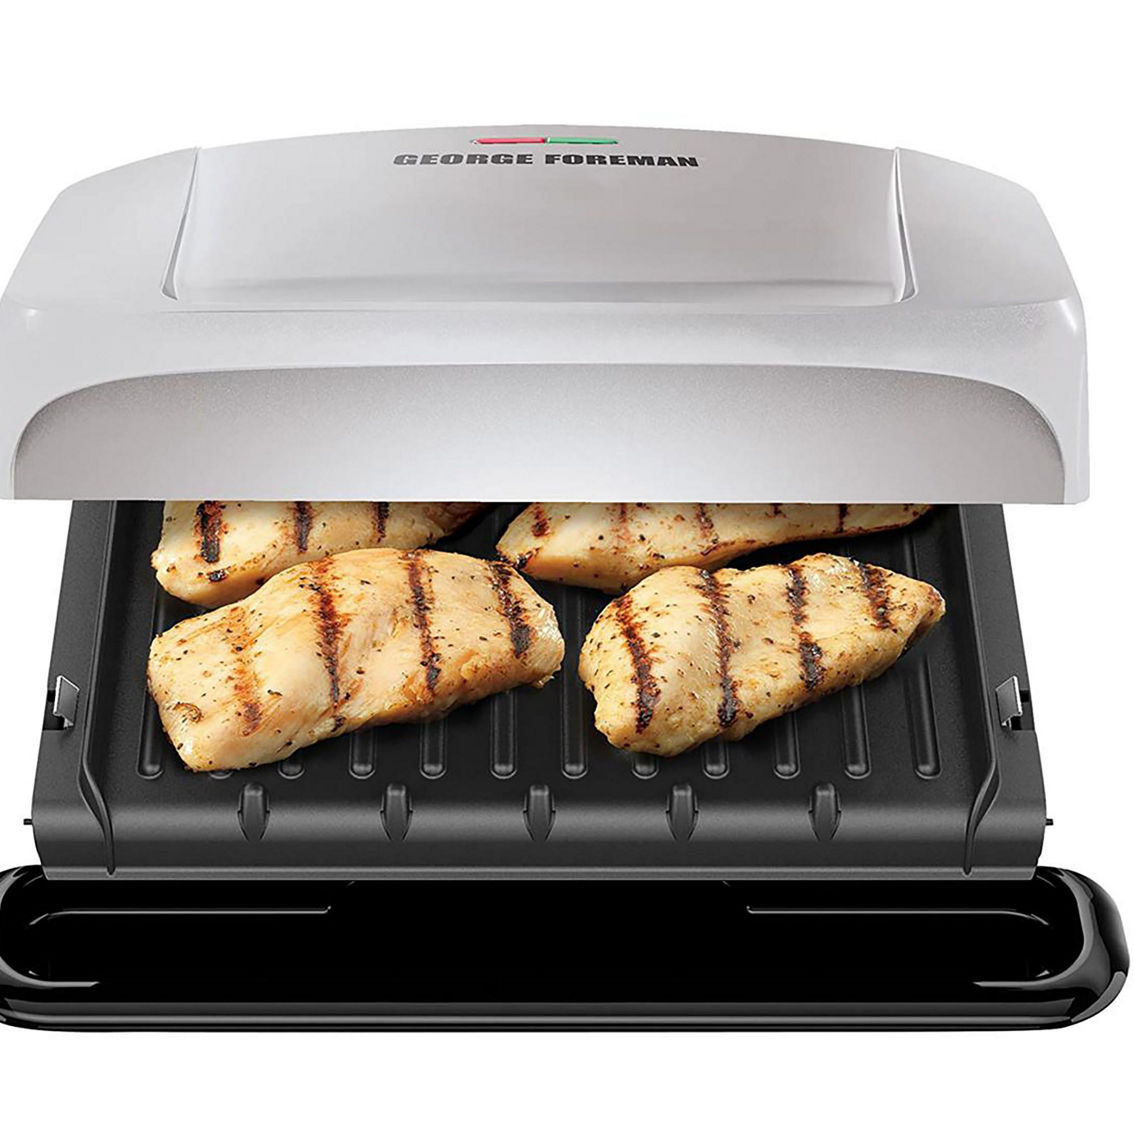 George Foreman 4 Serving Electric Indoor Grill and Panini Press in Silver - Image 2 of 5